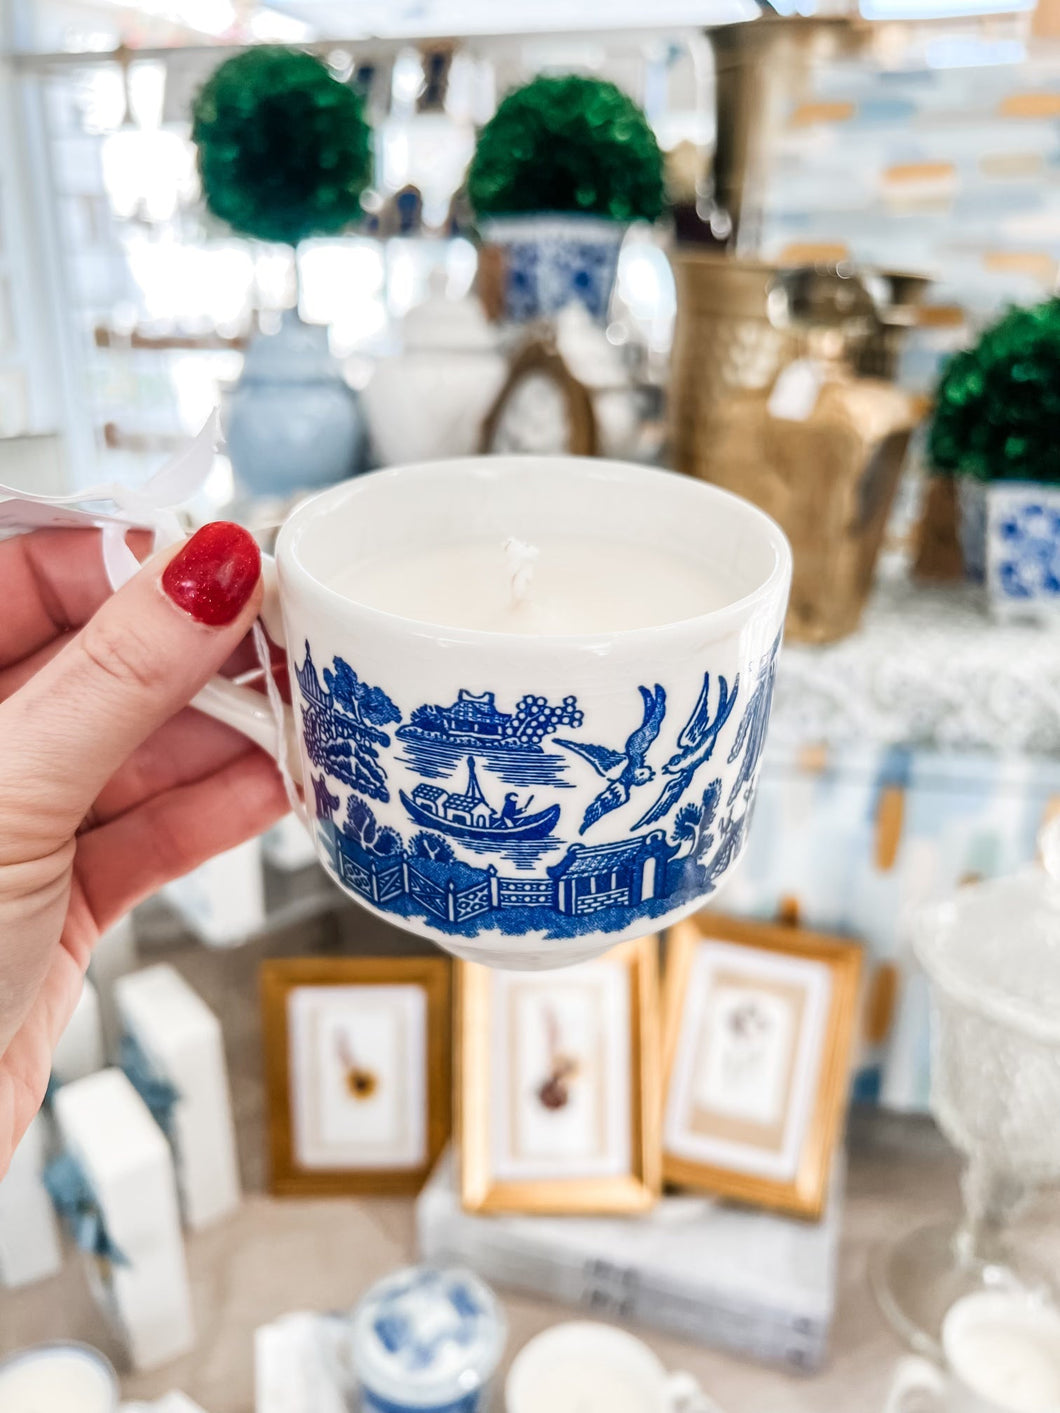 Soul Mate Blue and White Tea Cup scented candle-Belle Reve Designs by Megan Gatte